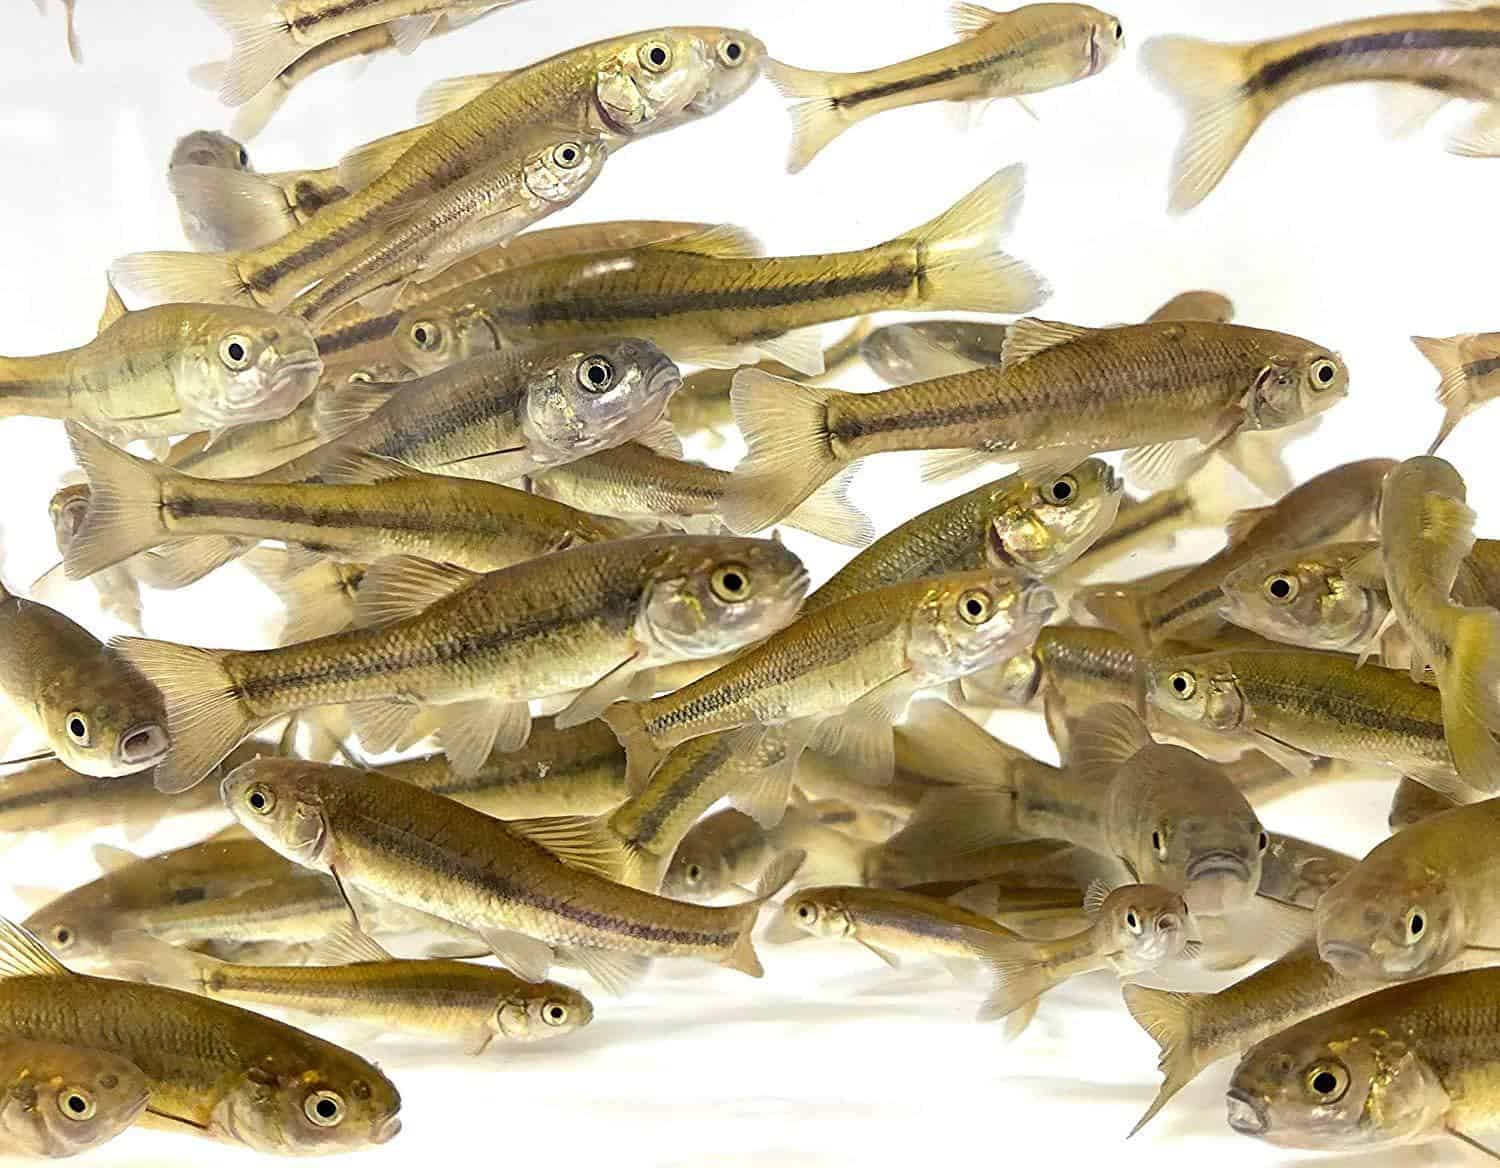 Domestic Minnows as Live bait for Crappie